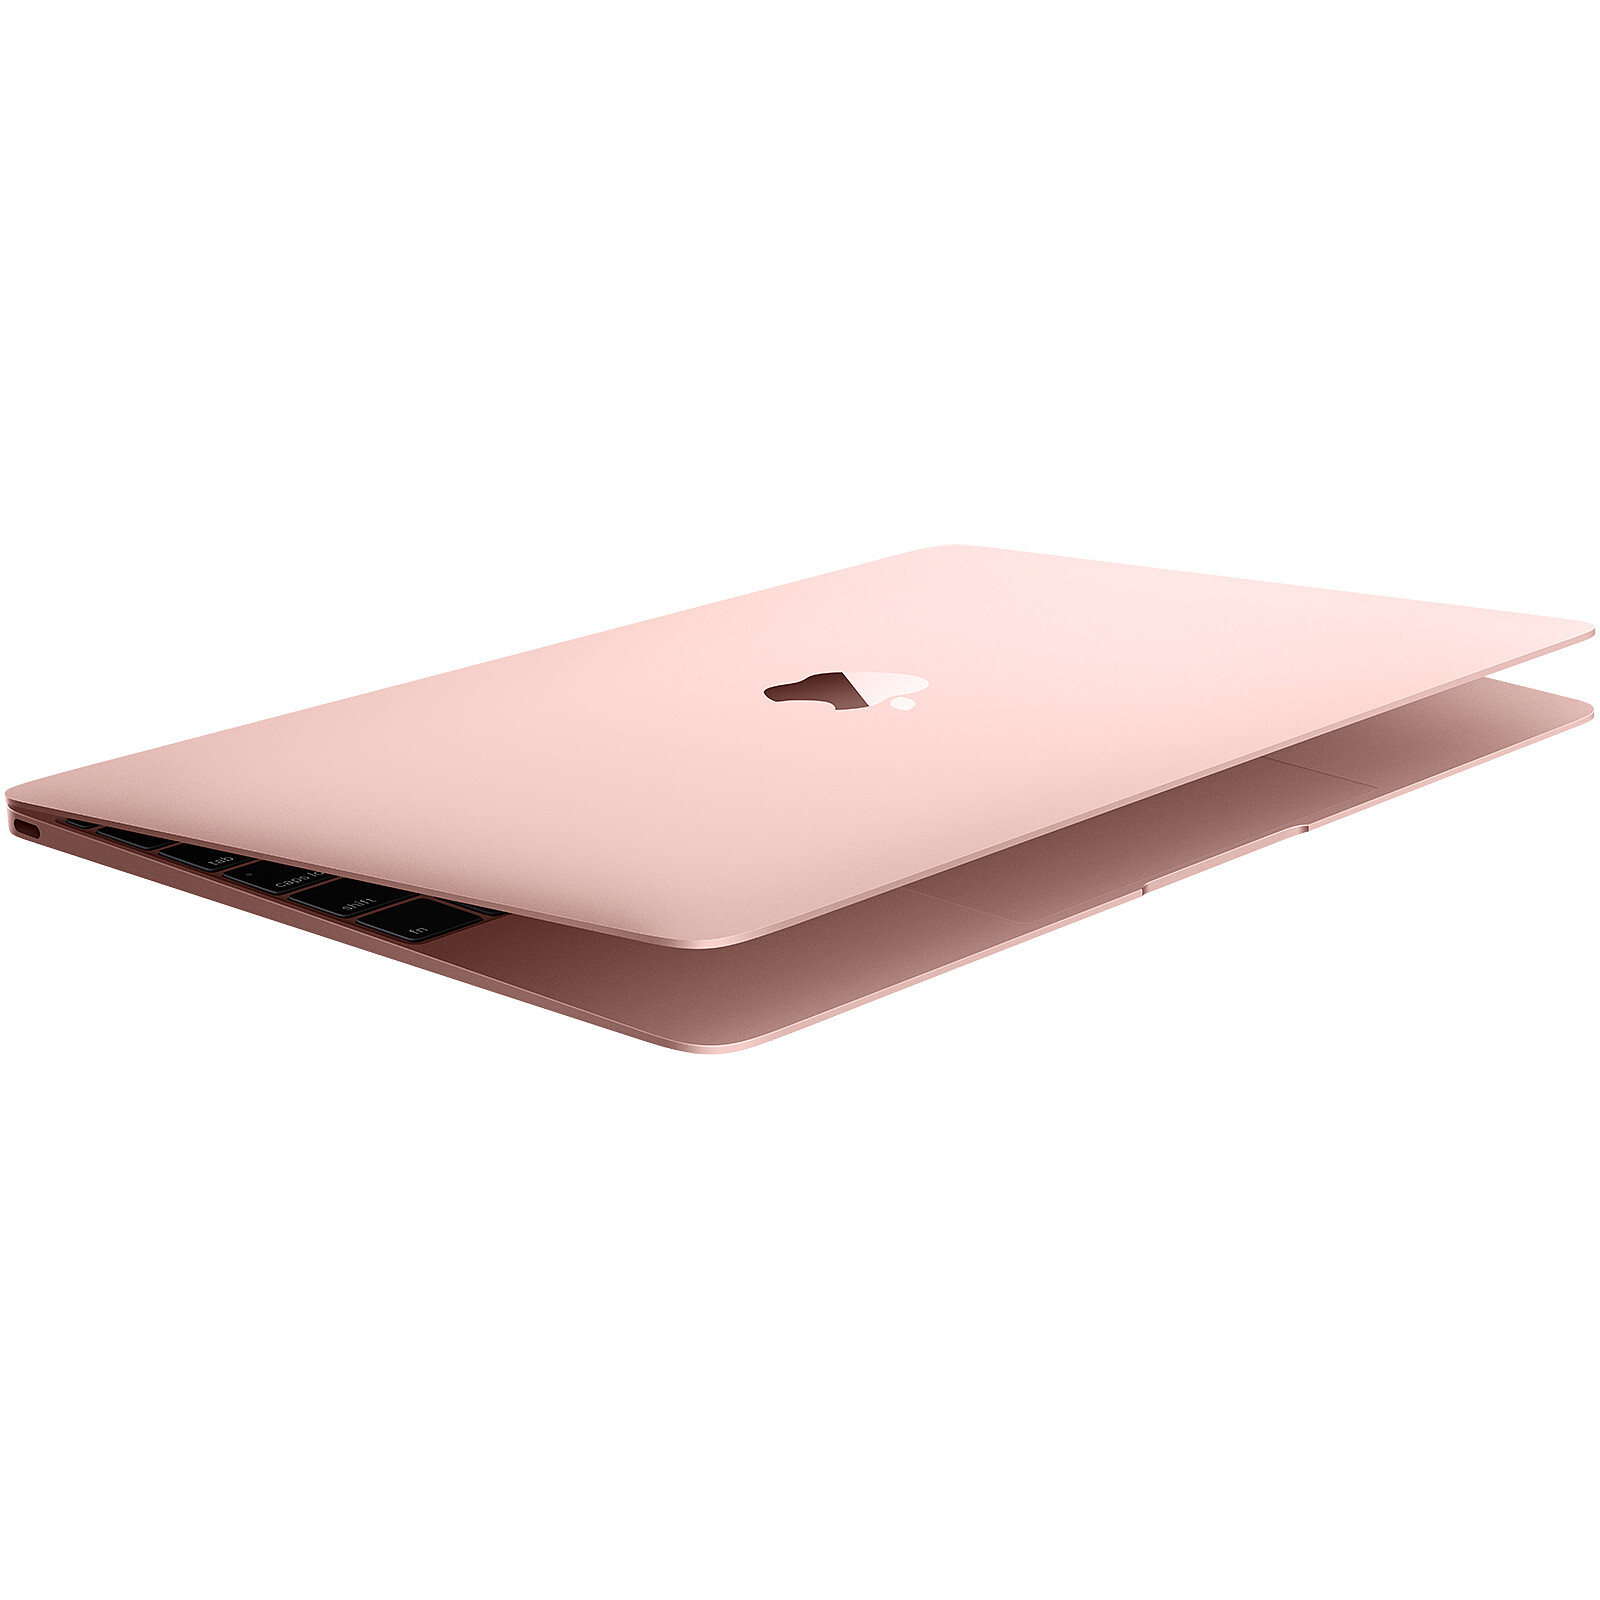 Apple MacBook 12 Or rose (MNYM2FN/A) · Reconditionné